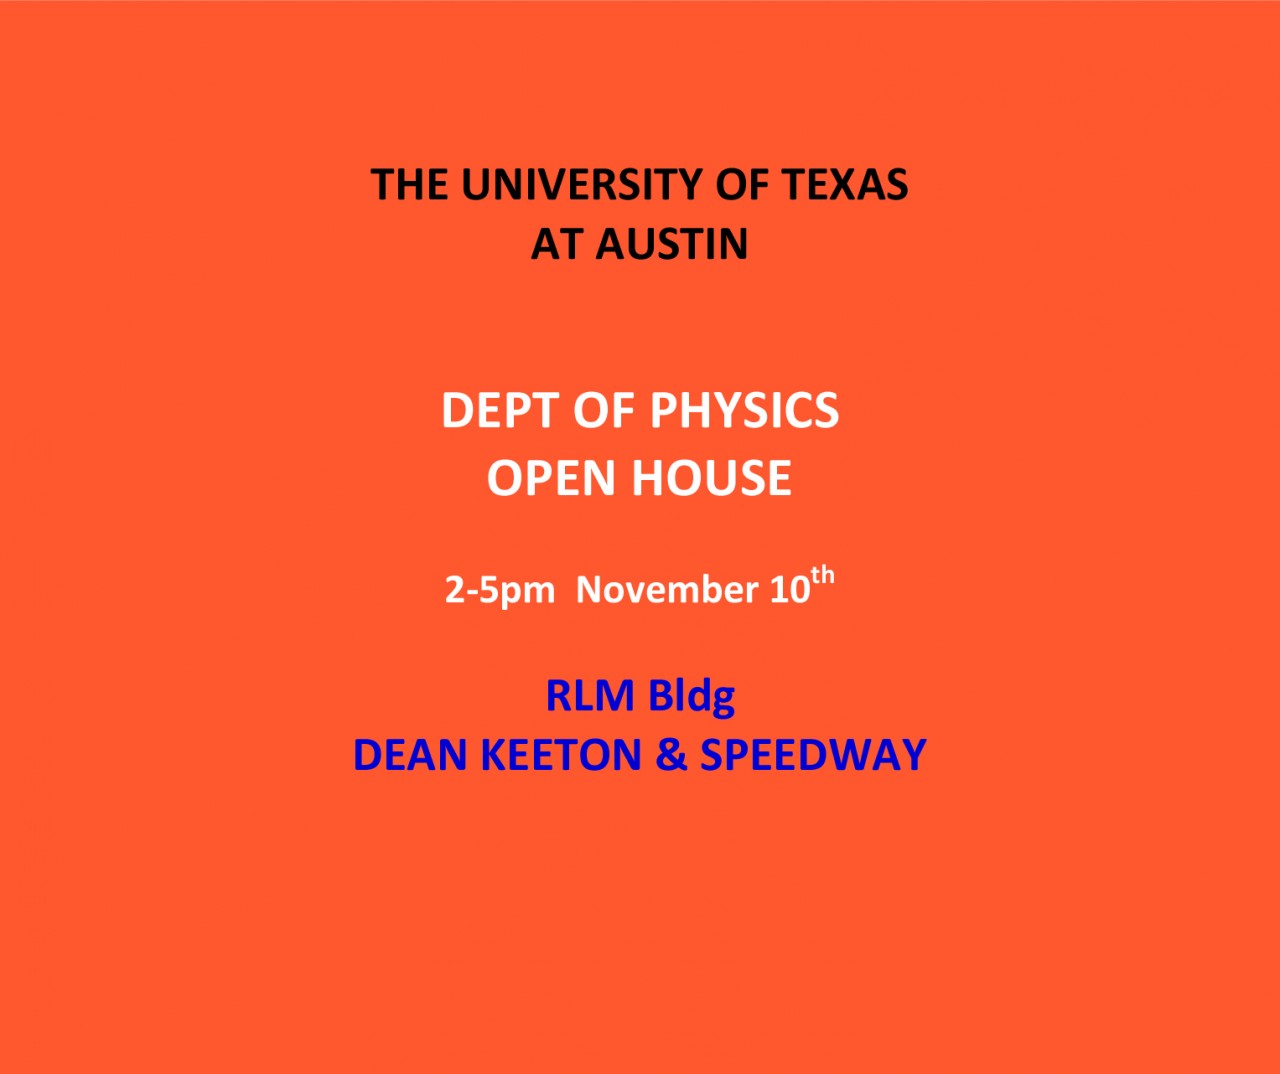 Physics Department OPEN HOUSE - November 10th from 2-5 pm